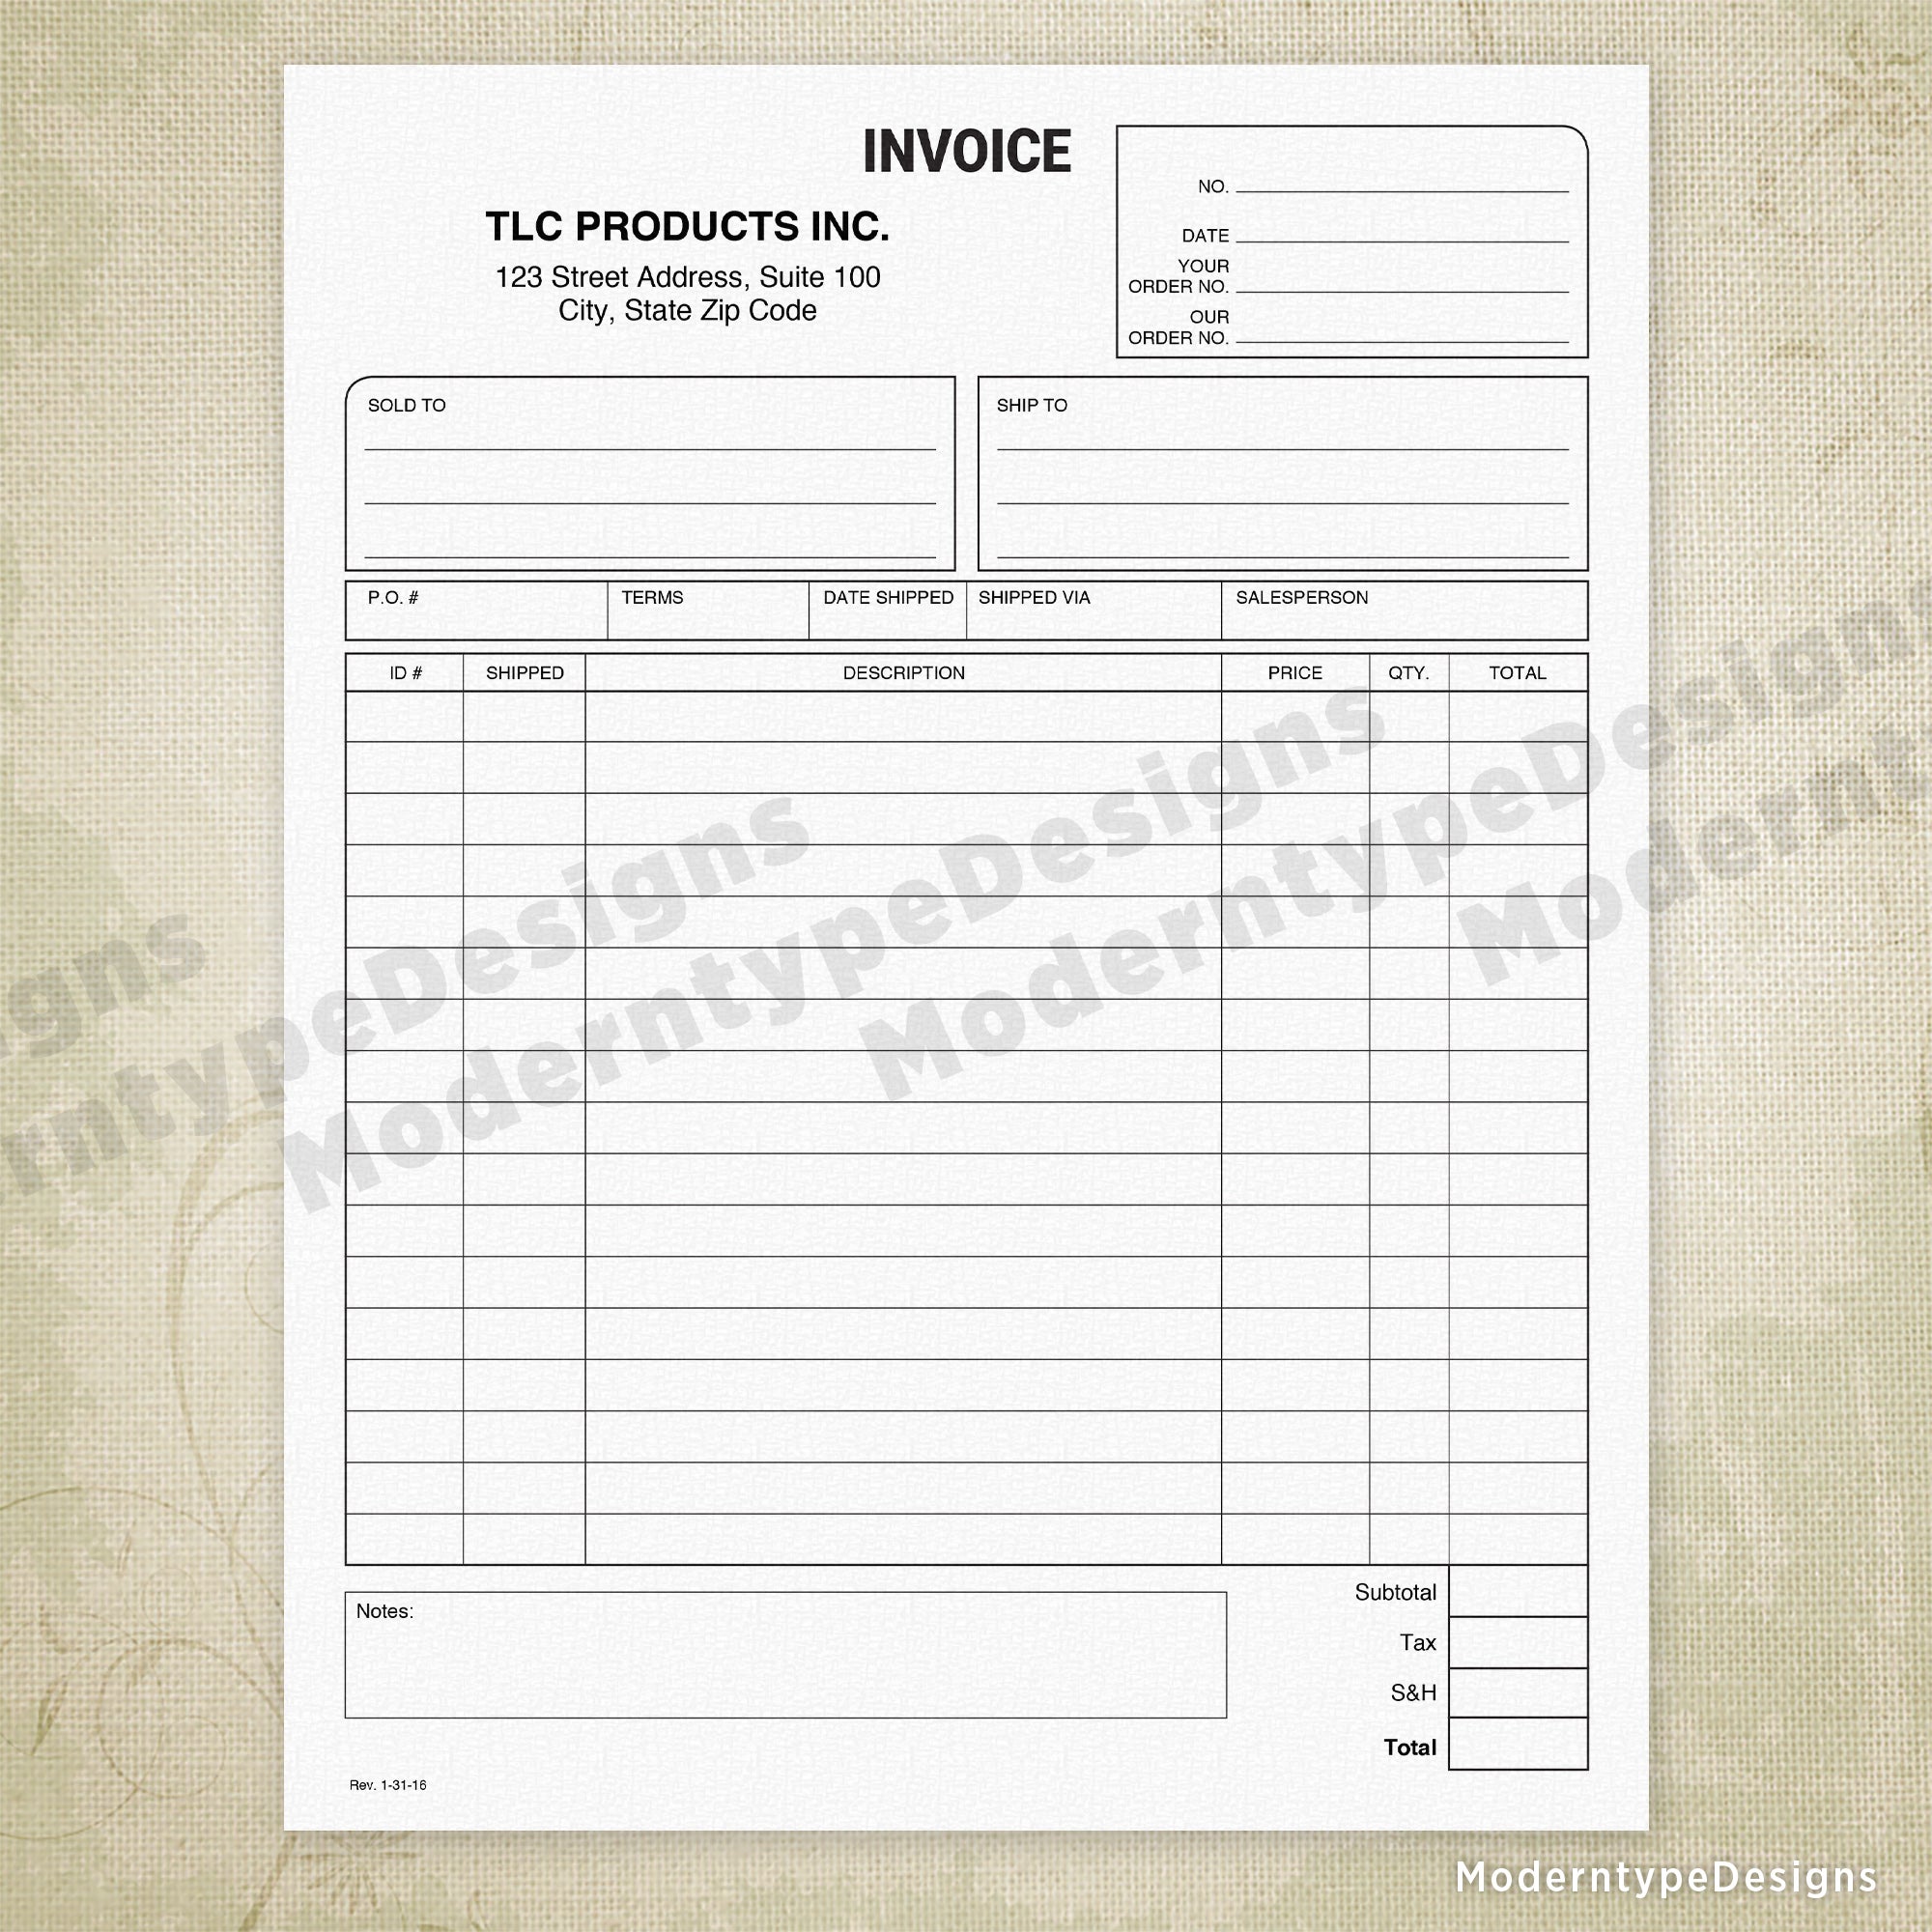 Invoice Form Printable, Personalized, #1